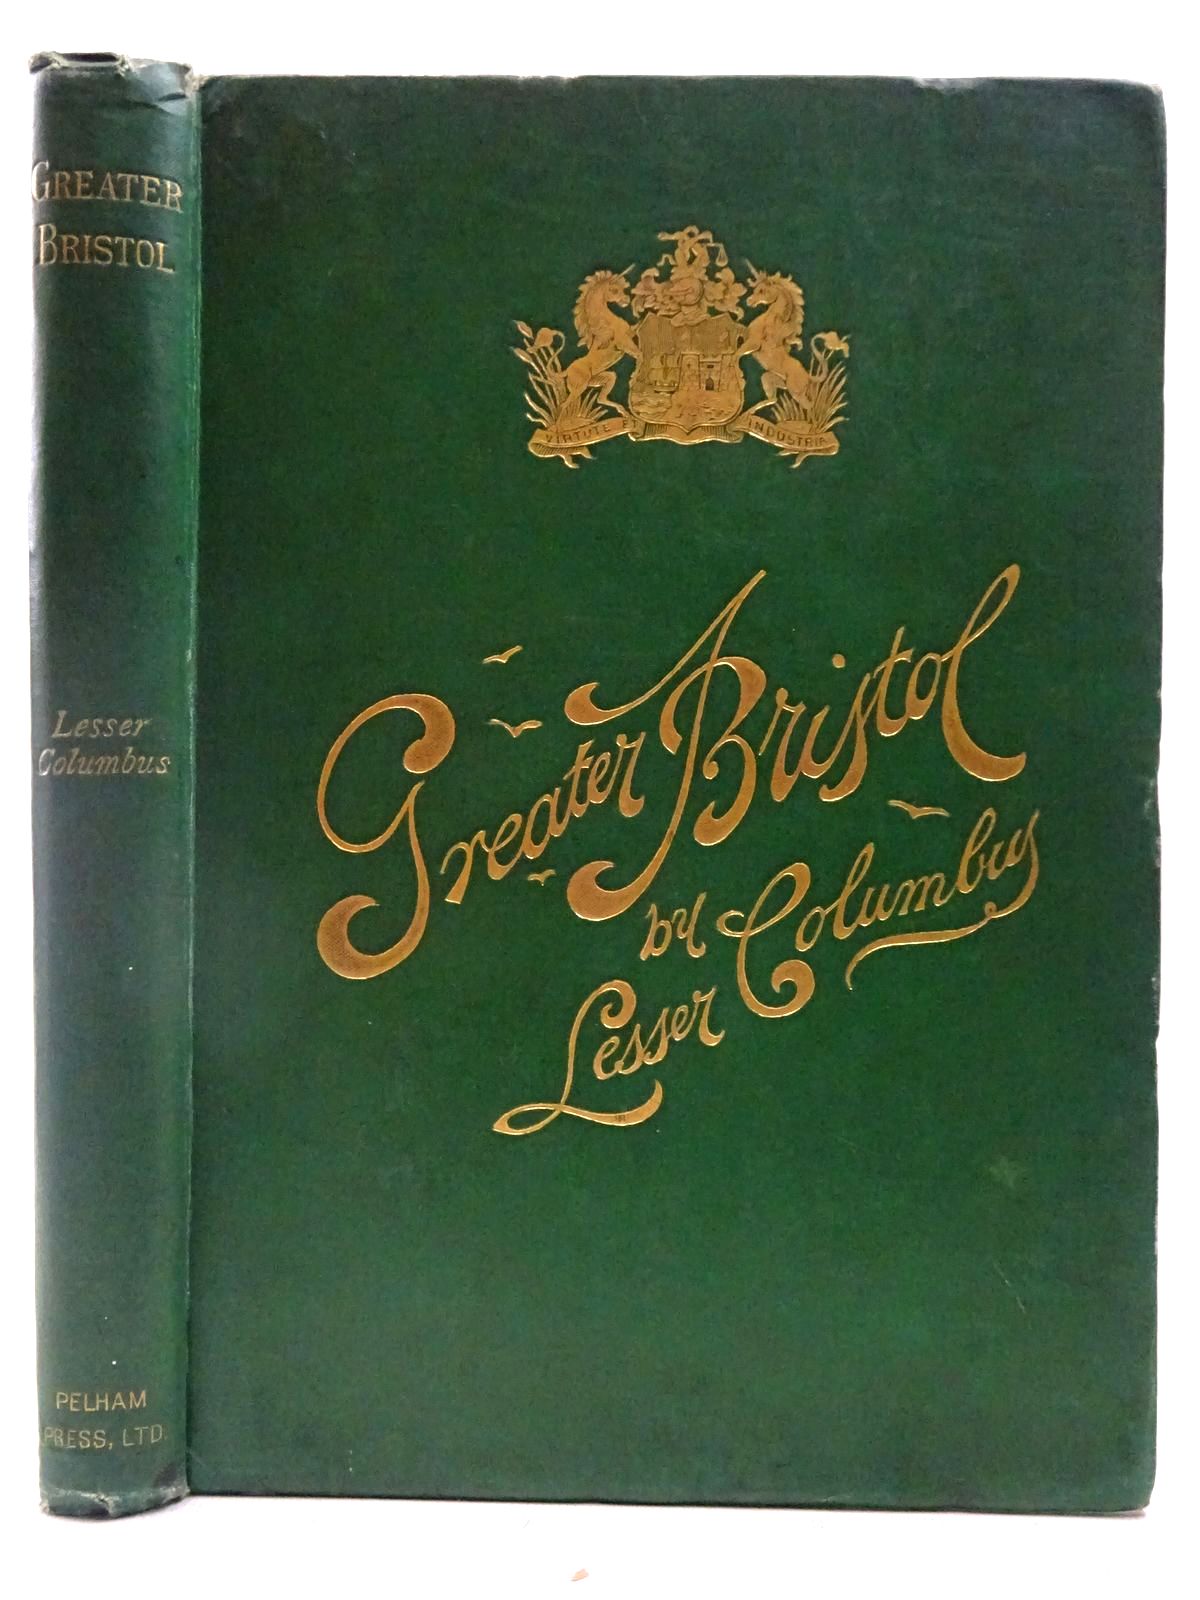 Photo of GREATER BRISTOL written by Columbus, Lesser published by The Pelham Press Ltd (STOCK CODE: 2127619)  for sale by Stella & Rose's Books